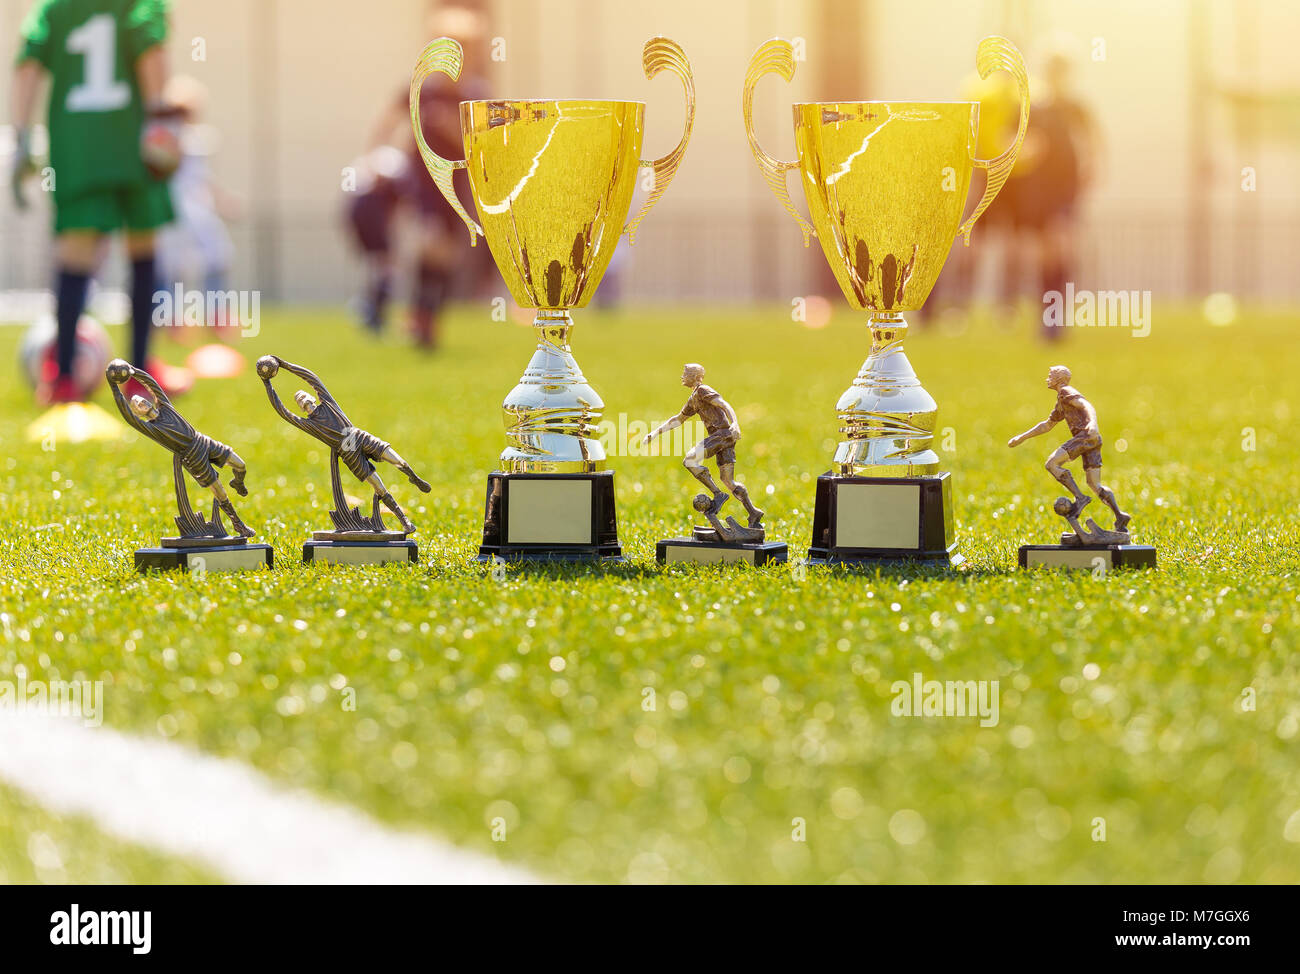 Football Tournament Trophies. Shining Golden Awards for the Best Team, Goalkeeper and Striker Forward. Football Match in the Background Stock Photo - Alamy